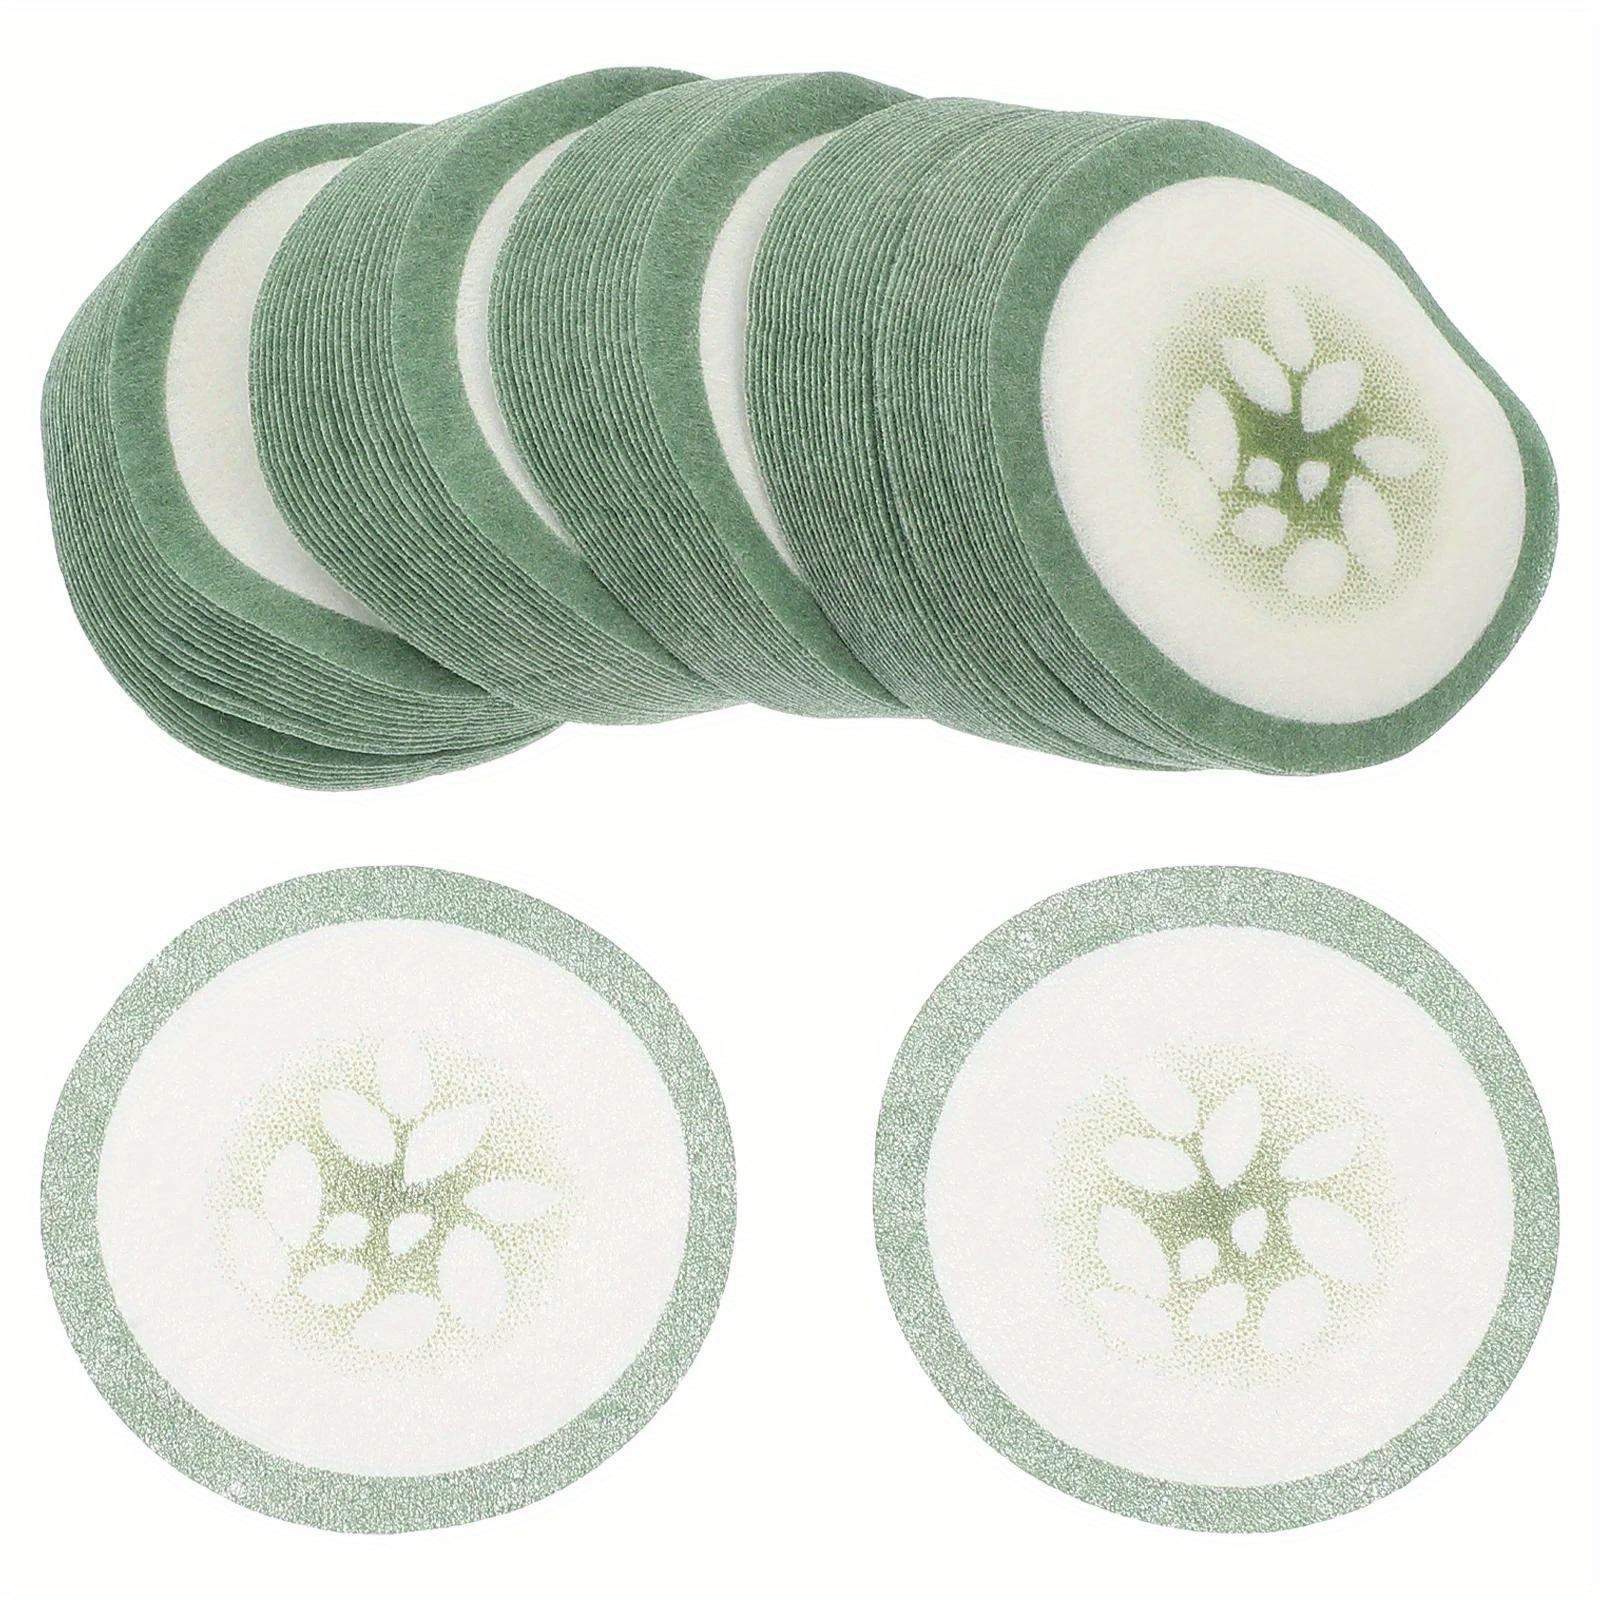 

100-pack Soothing Cucumber Eye Mask Patches, Moisturizing Skincare For All Skin Types, Chemical-free, Refreshing Green Design